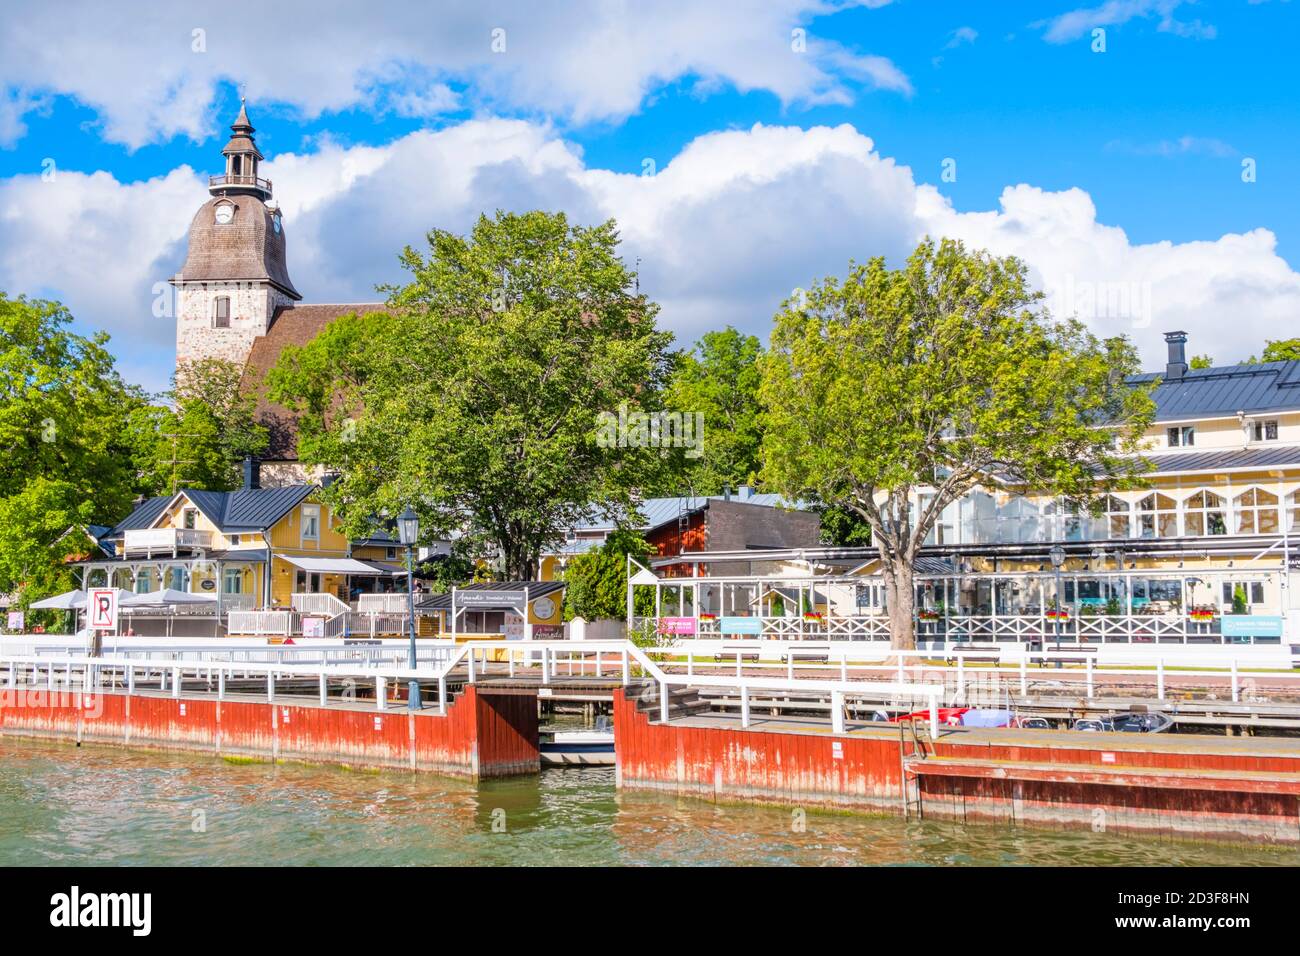 Seaside with restaurants and church, old town, Naantali, Finland Stock Photo